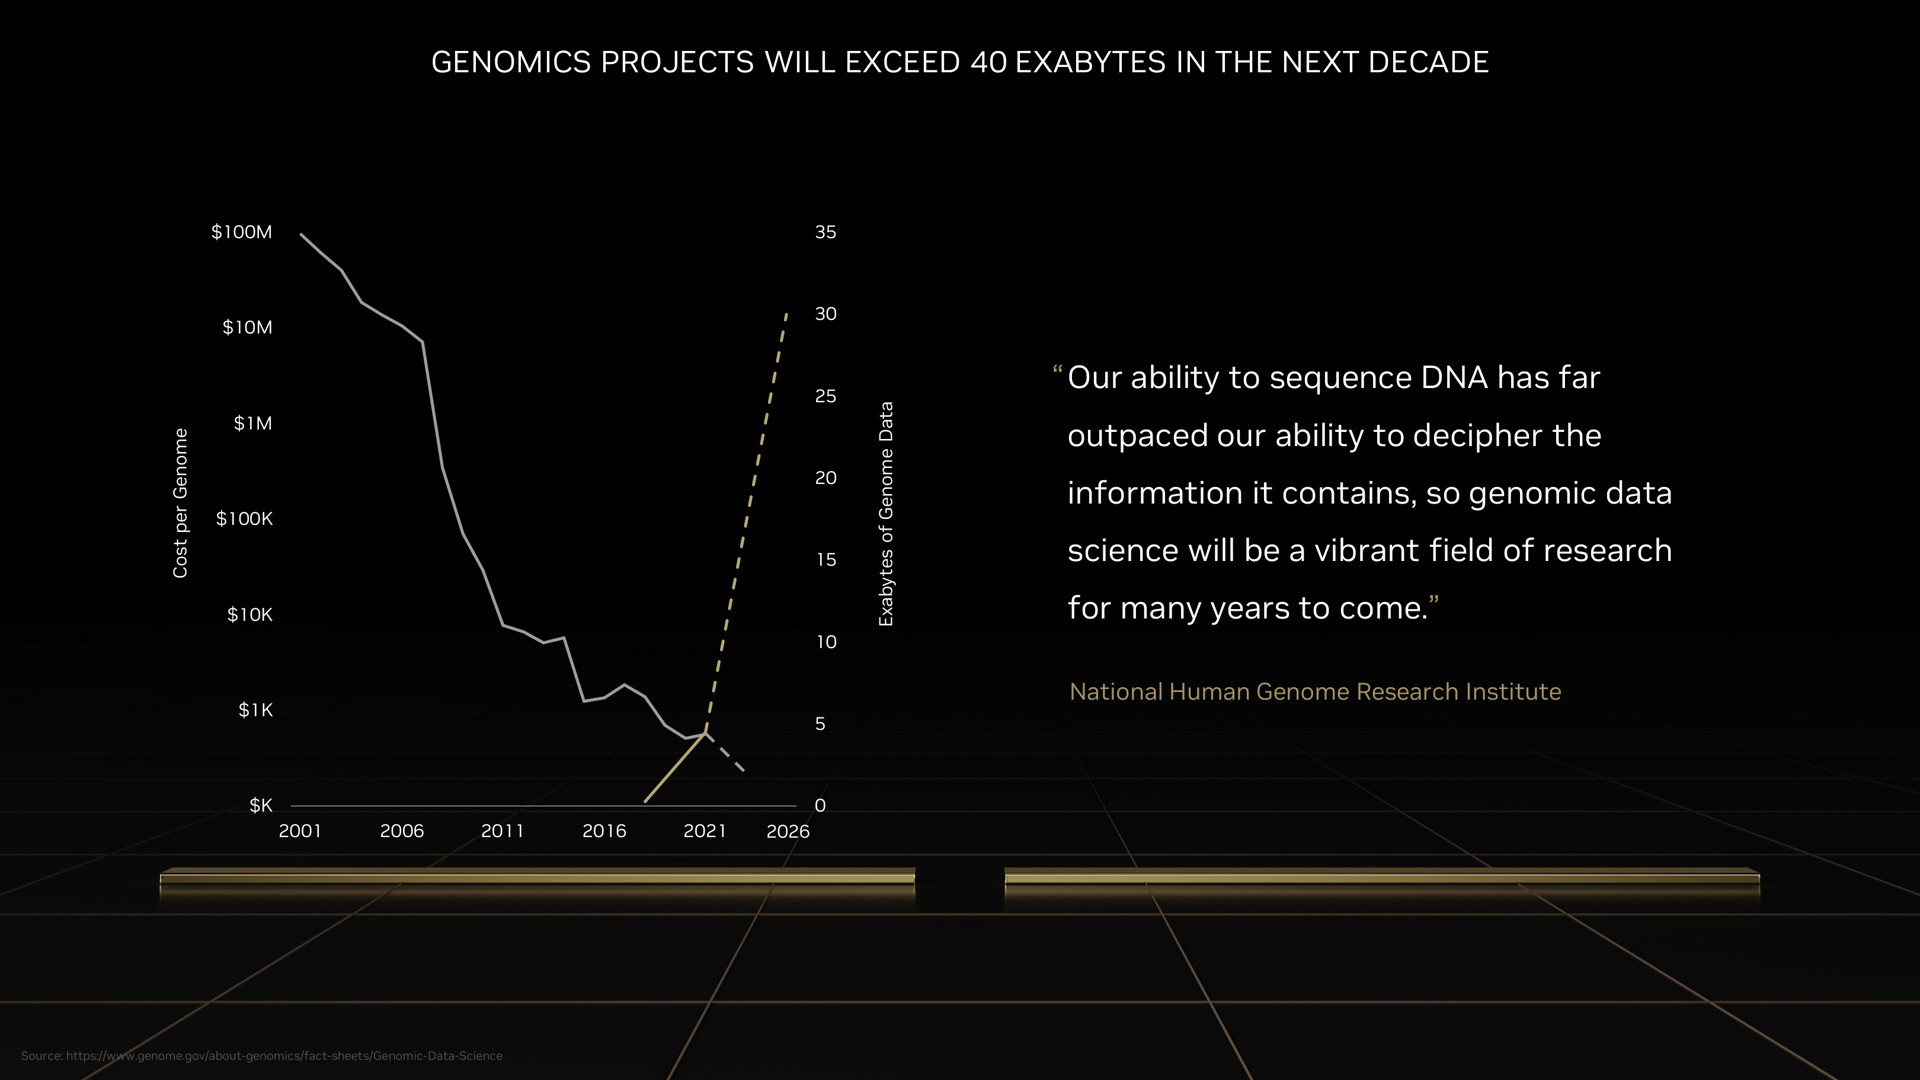 projects will exceed in the next decade our ability to sequence has far outpaced our ability to decipher the information it contains so genomic data science will be a vibrant field of research for many years to come | NVIDIA